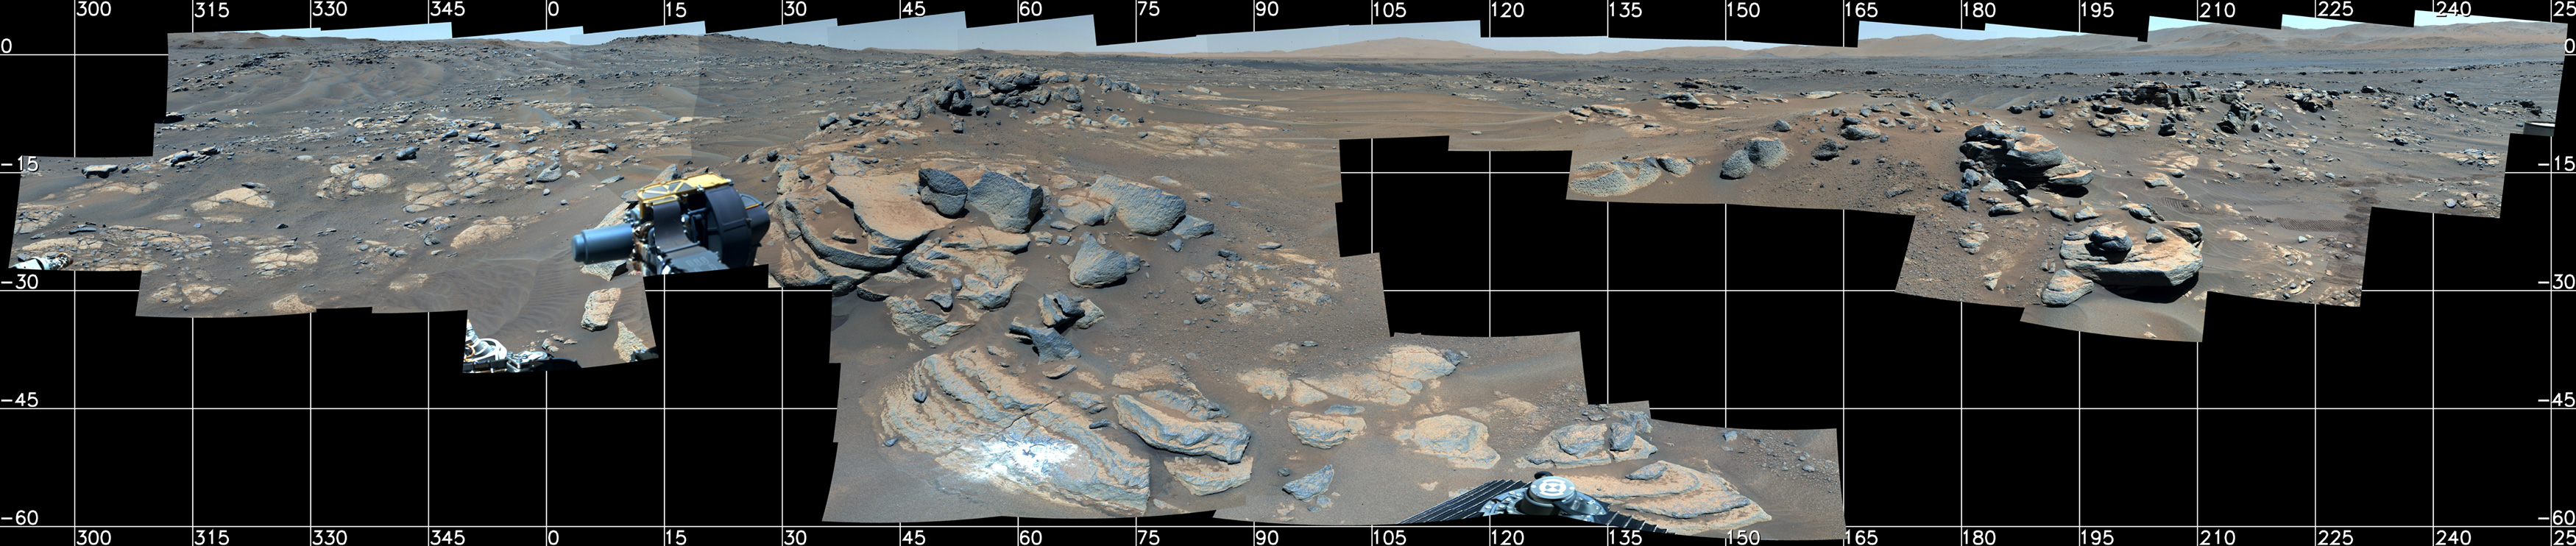 Against a dark grid with location points, a mosaic of photos is collaged together showing the rocky surface of mars. Some rocks create strong shadows and have a bluish-grey color, while most of the surface is tan.